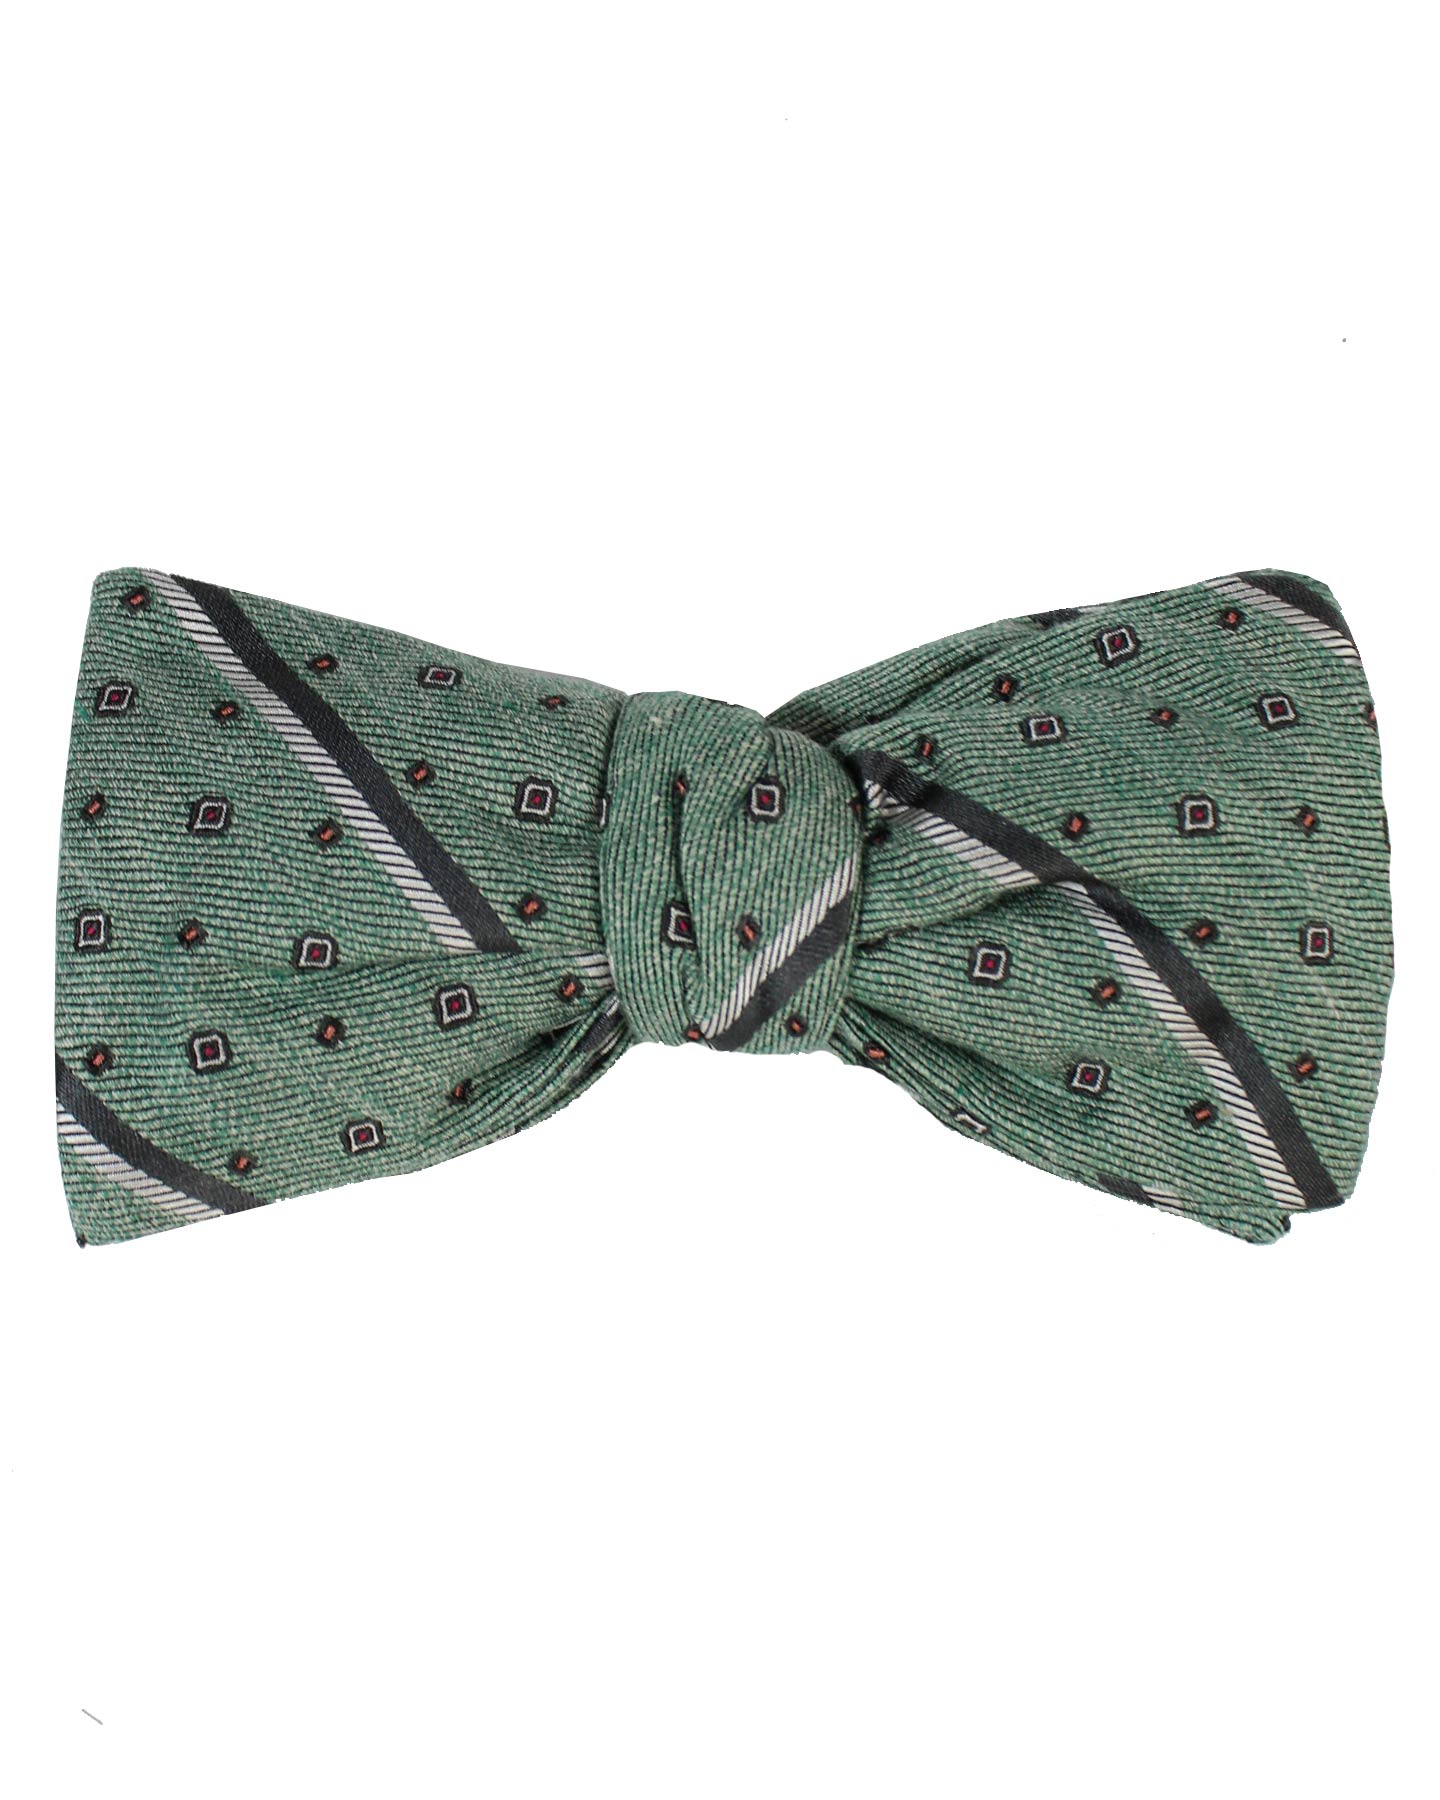 Buy online Self Design Tie Combo Set from Ties and Bow Ties for